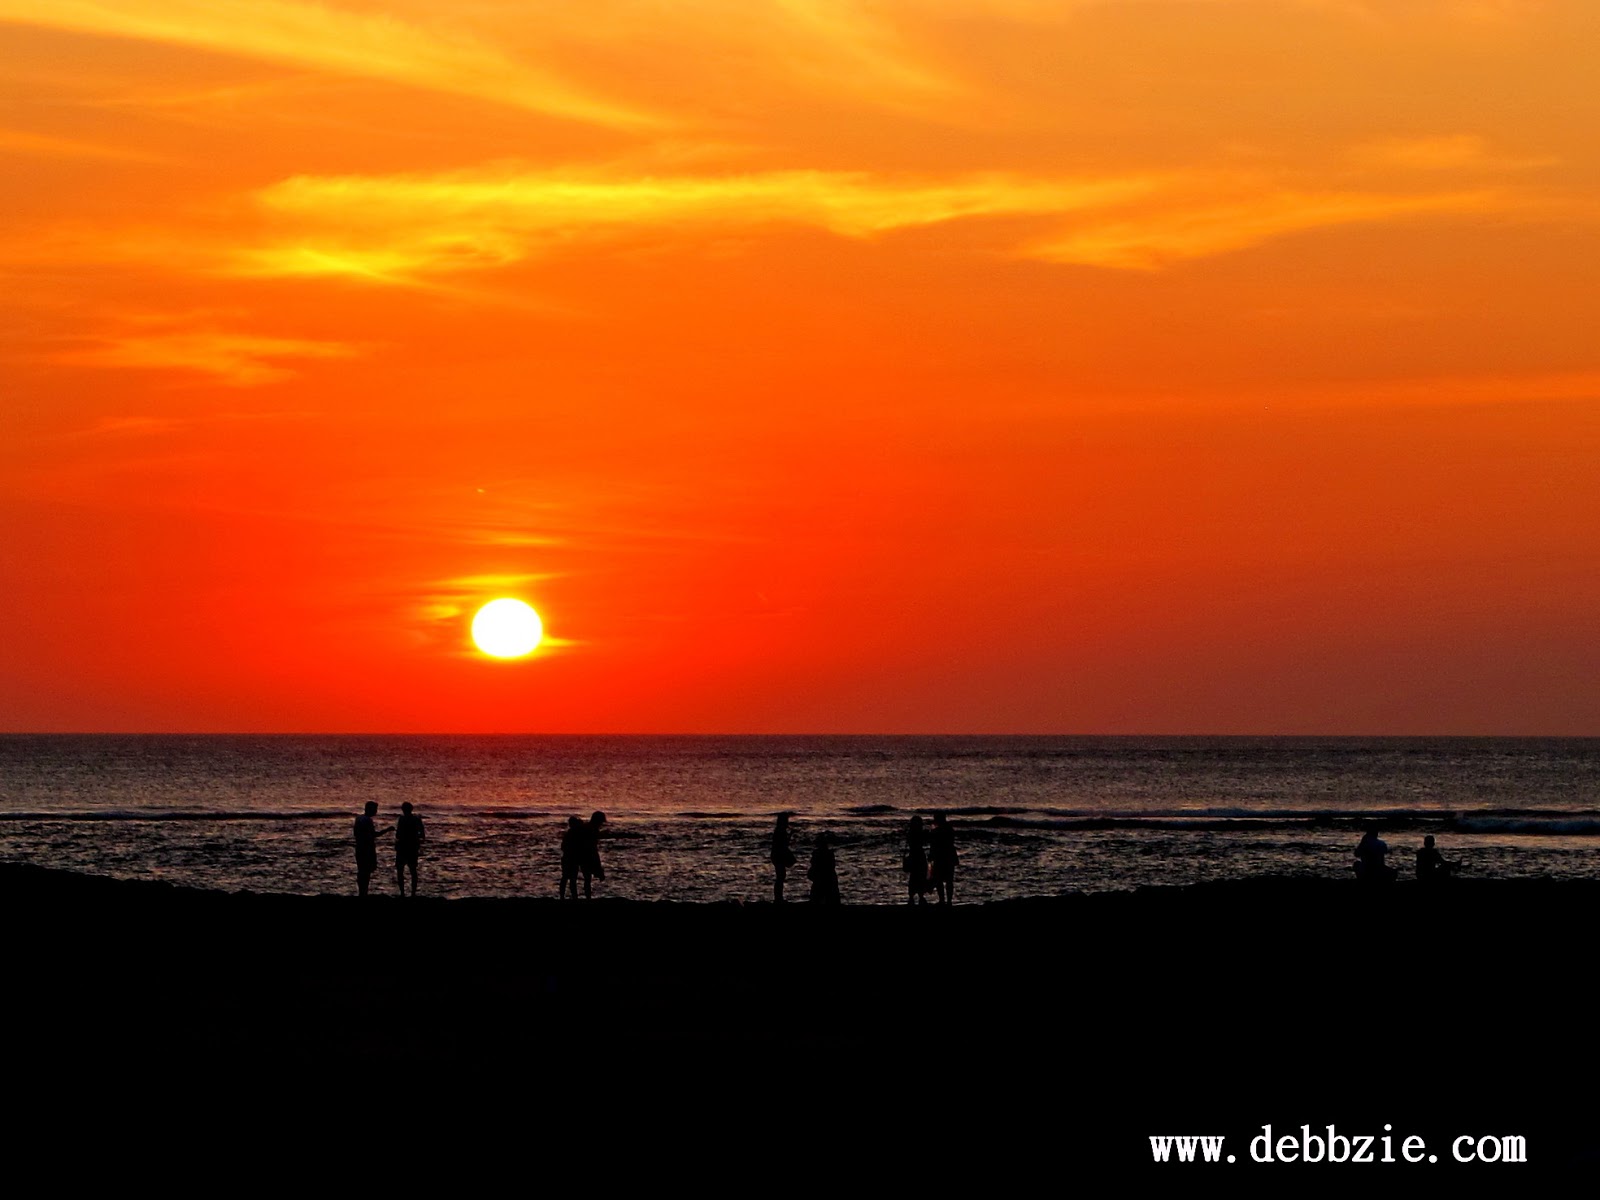 Indonesia: 15 Photos of Sunset in Bali